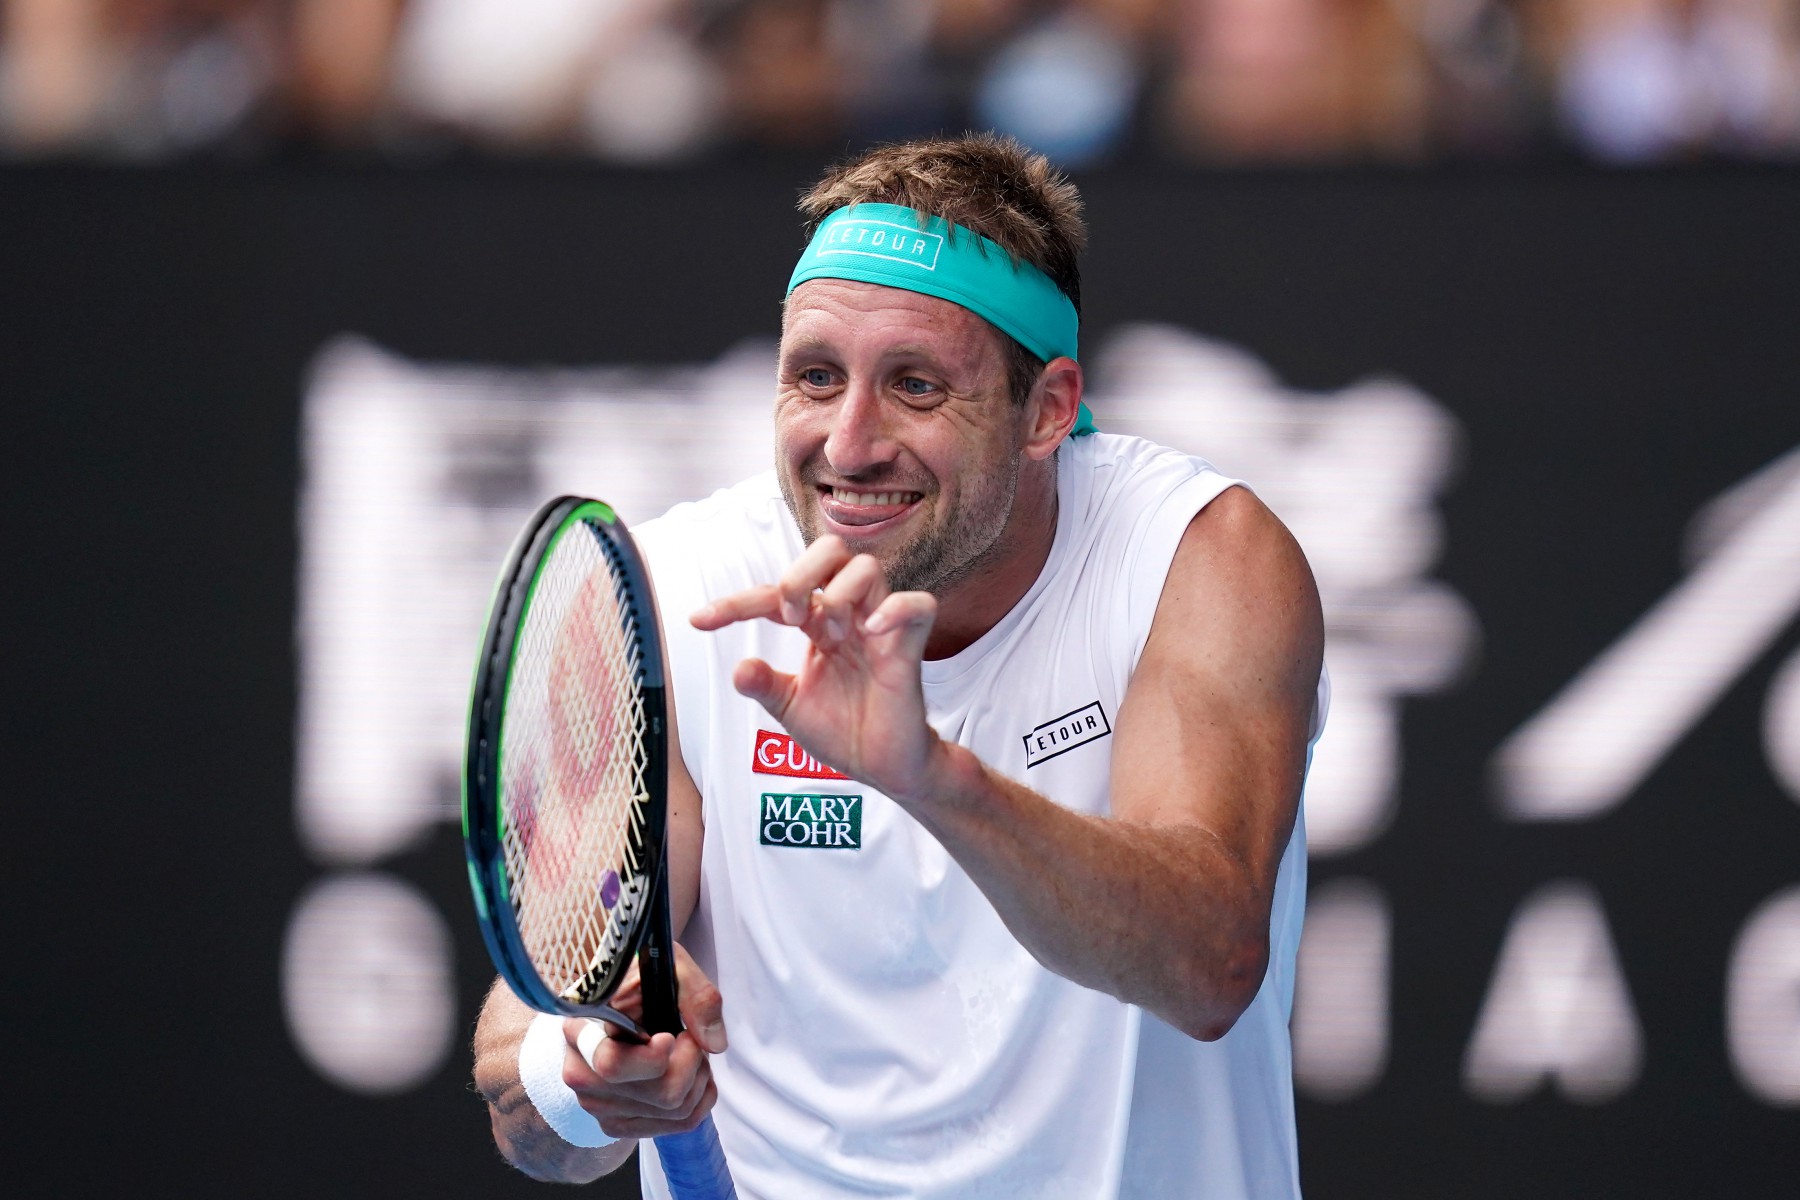 Sandgren was within a whisker of winning as he saw seven match points come and go